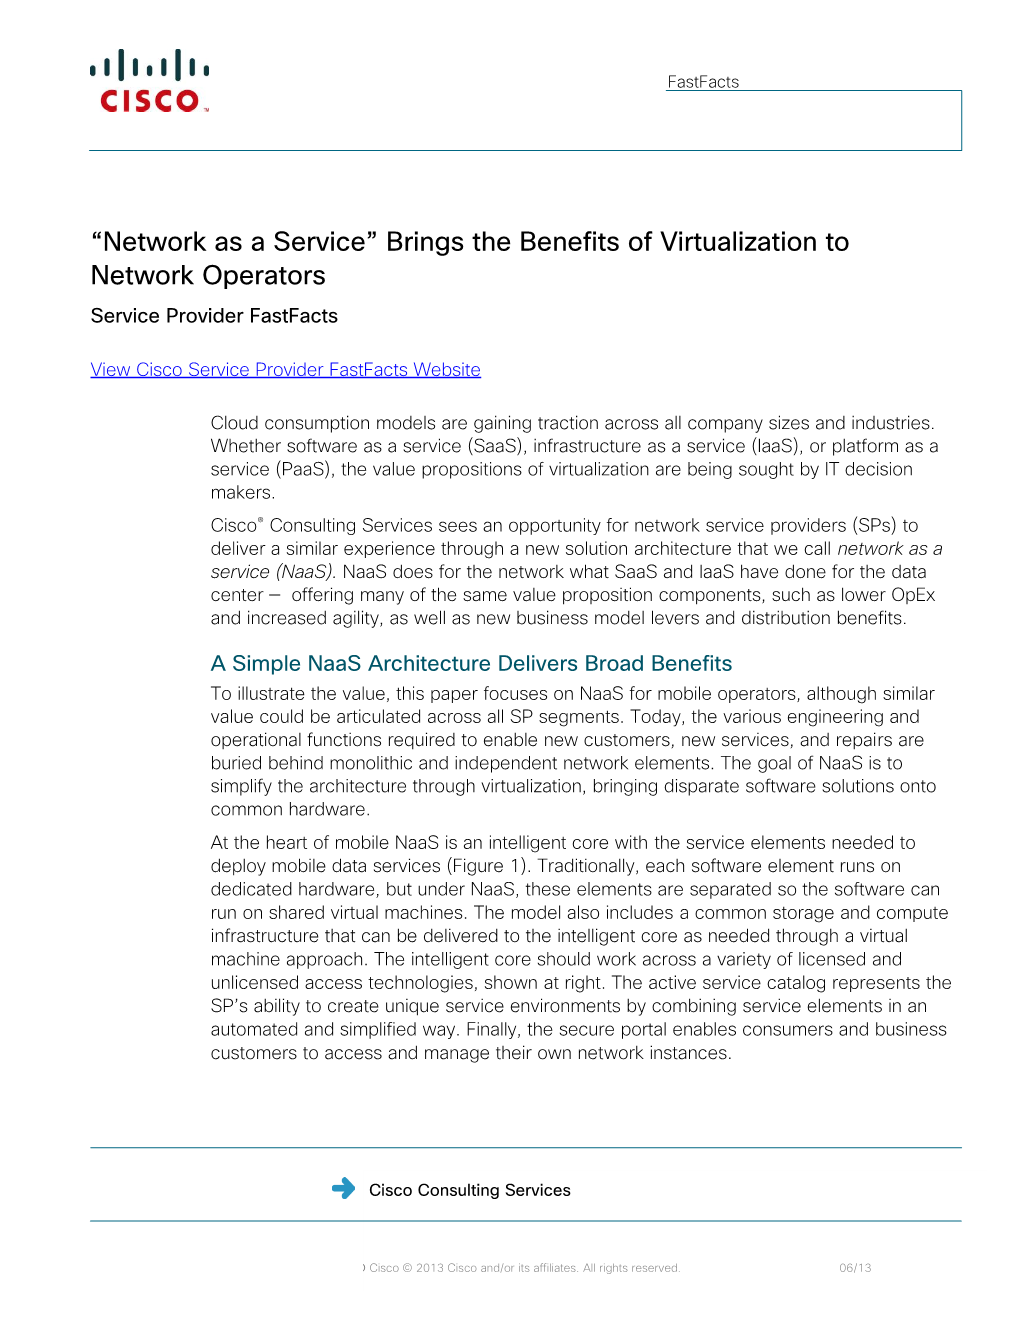 Network As a Service” Brings the Benefits of Virtualization to Network Operators Service Provider Fastfacts